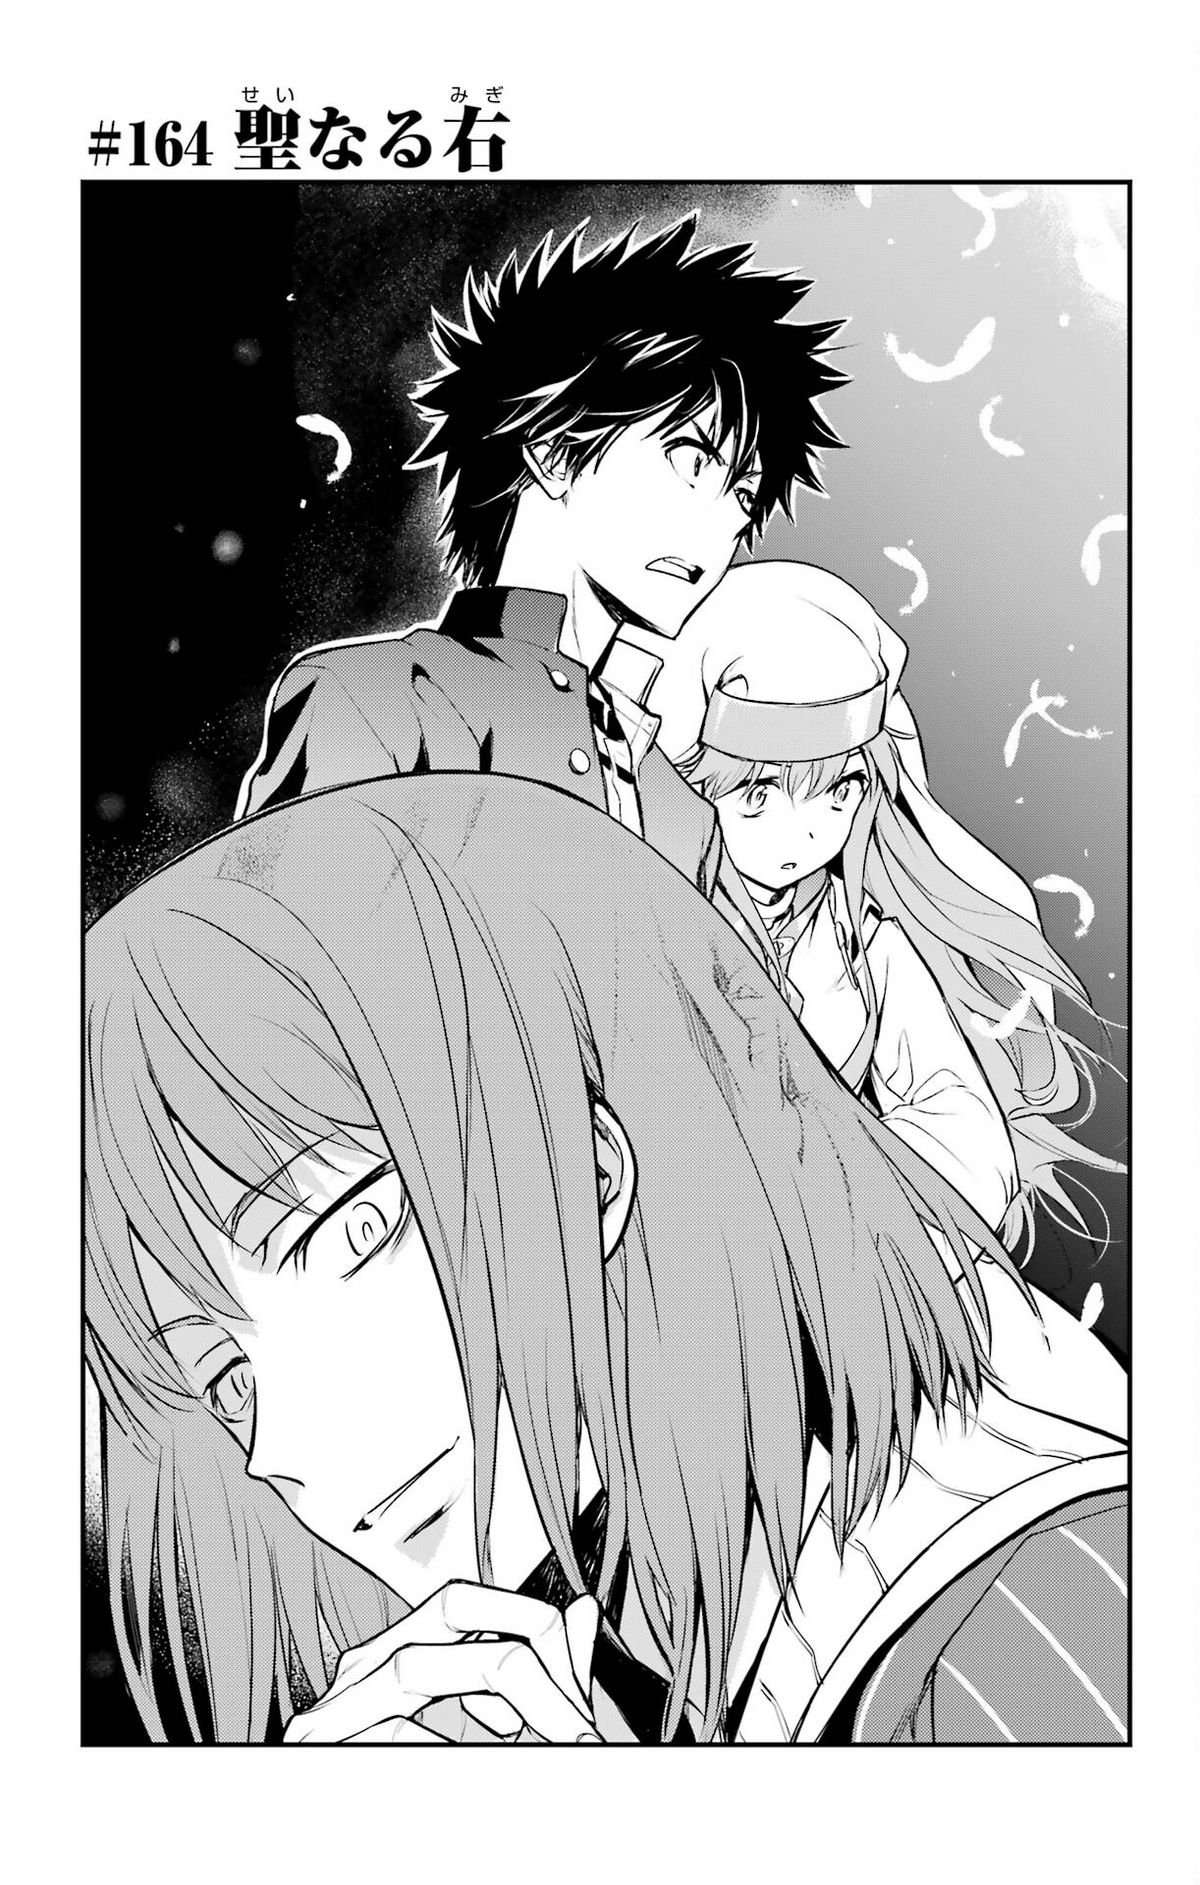 Heaven's Feel Manga chapter 51 is out : r/fatestaynight